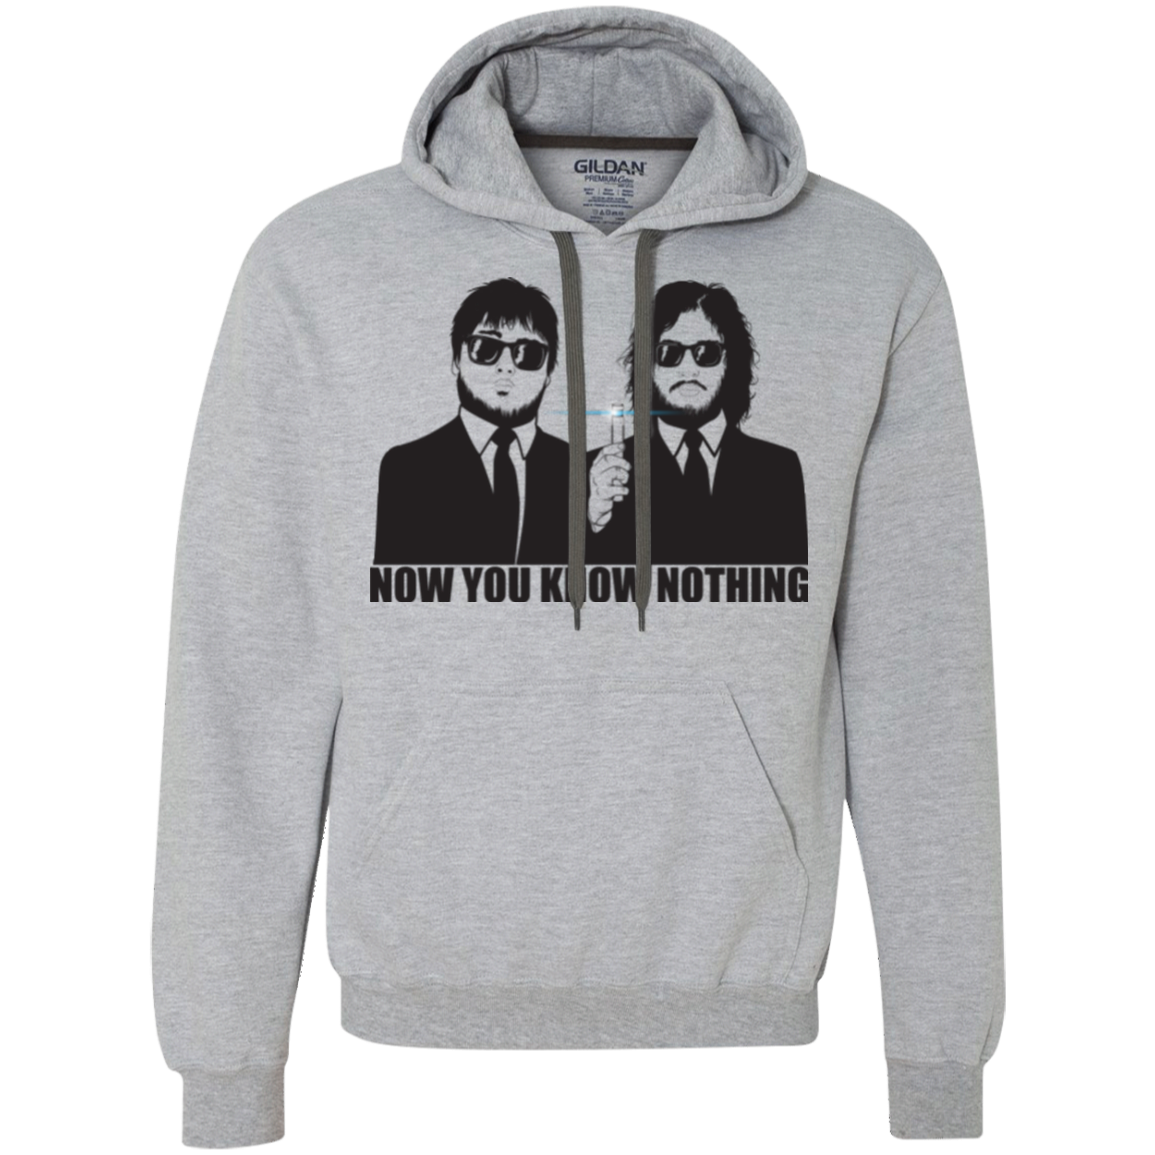 NOW YOU KNOW NOTHING Premium Fleece Hoodie